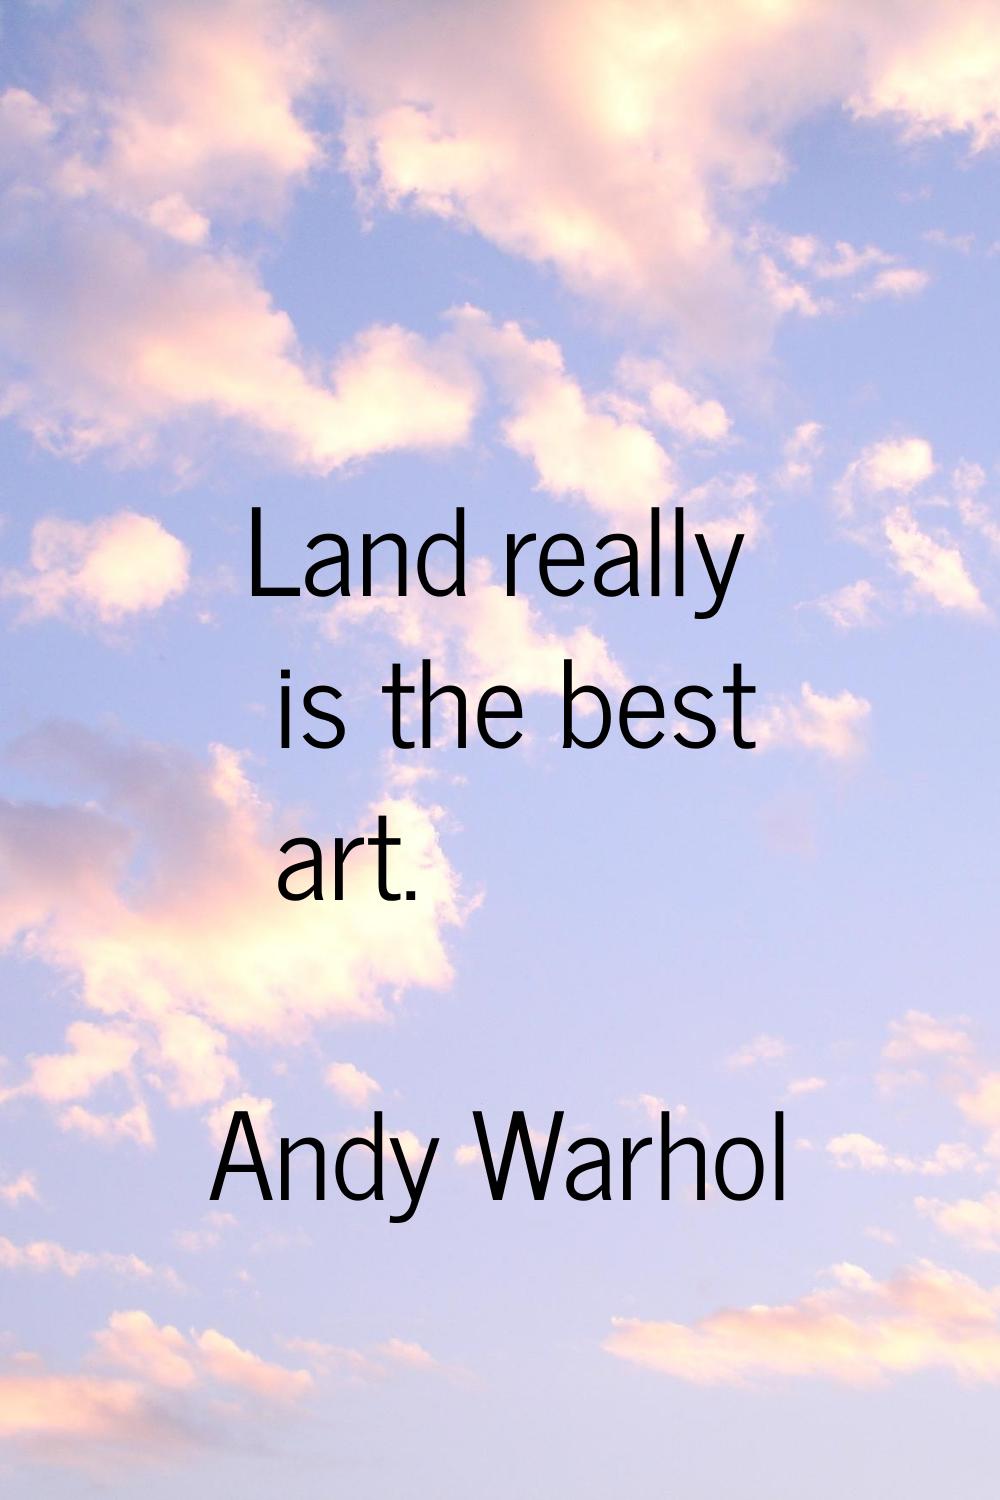 Land really is the best art.